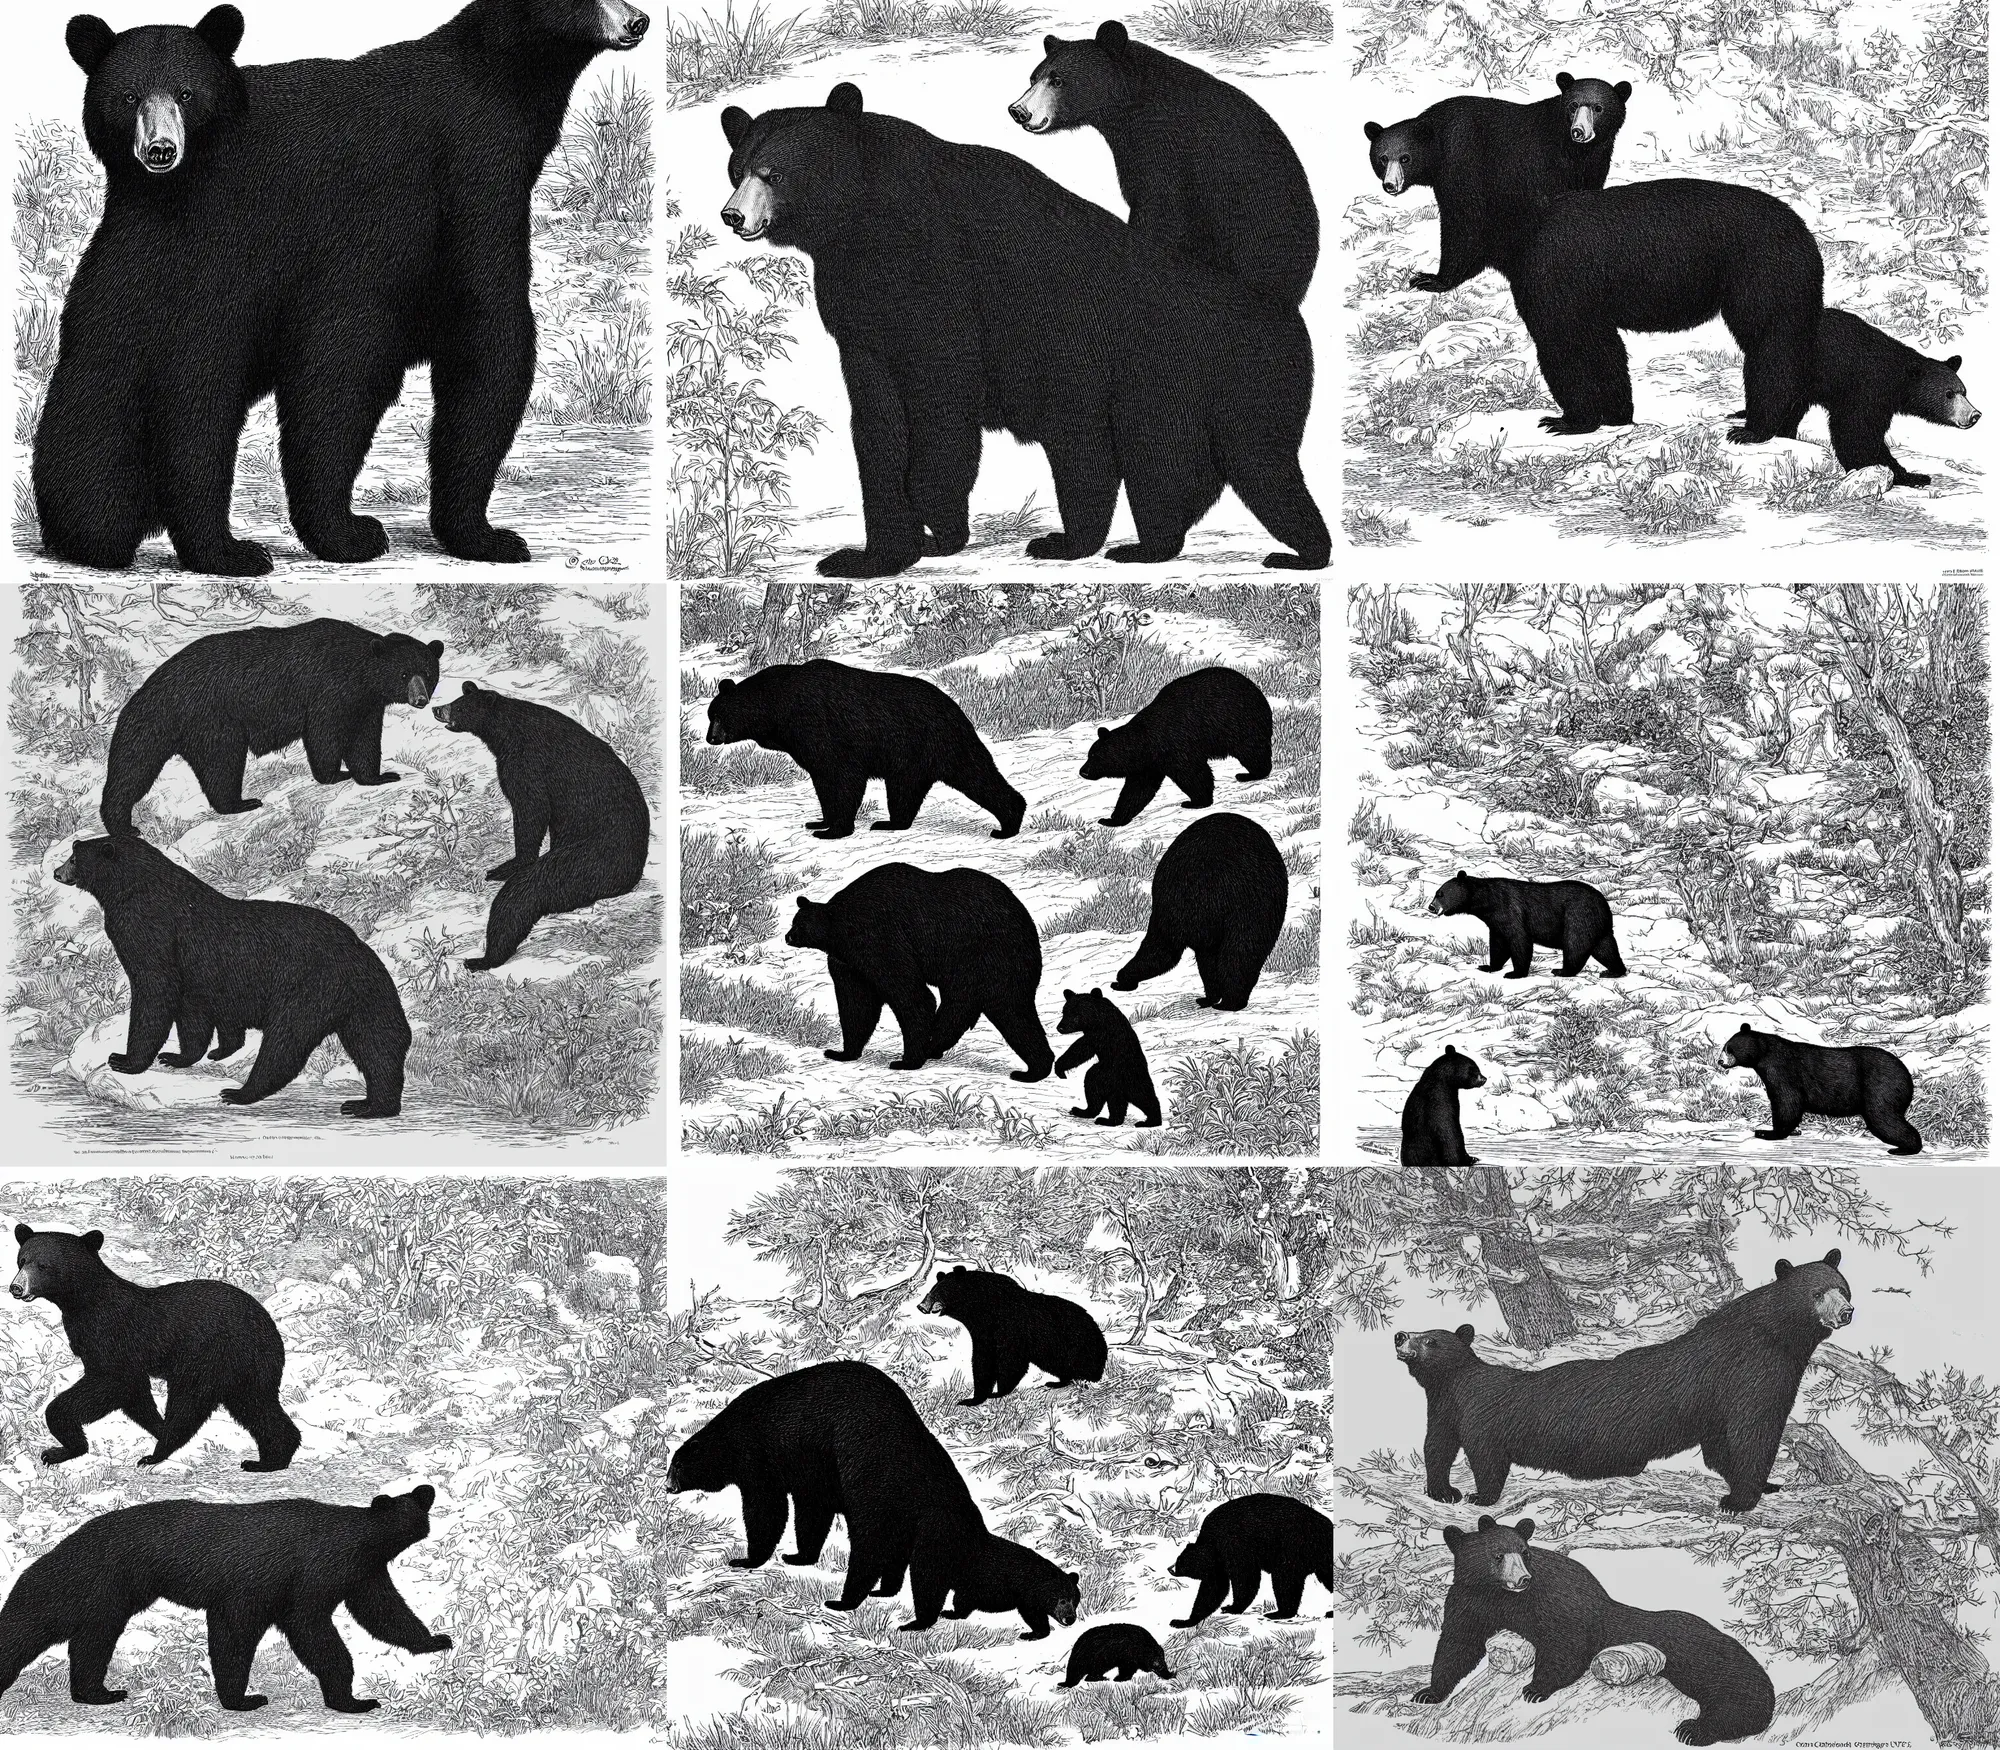 Prompt: black bear alone against a white background, by Currier and Ives, coloring book page, black and white, pen & ink drawing